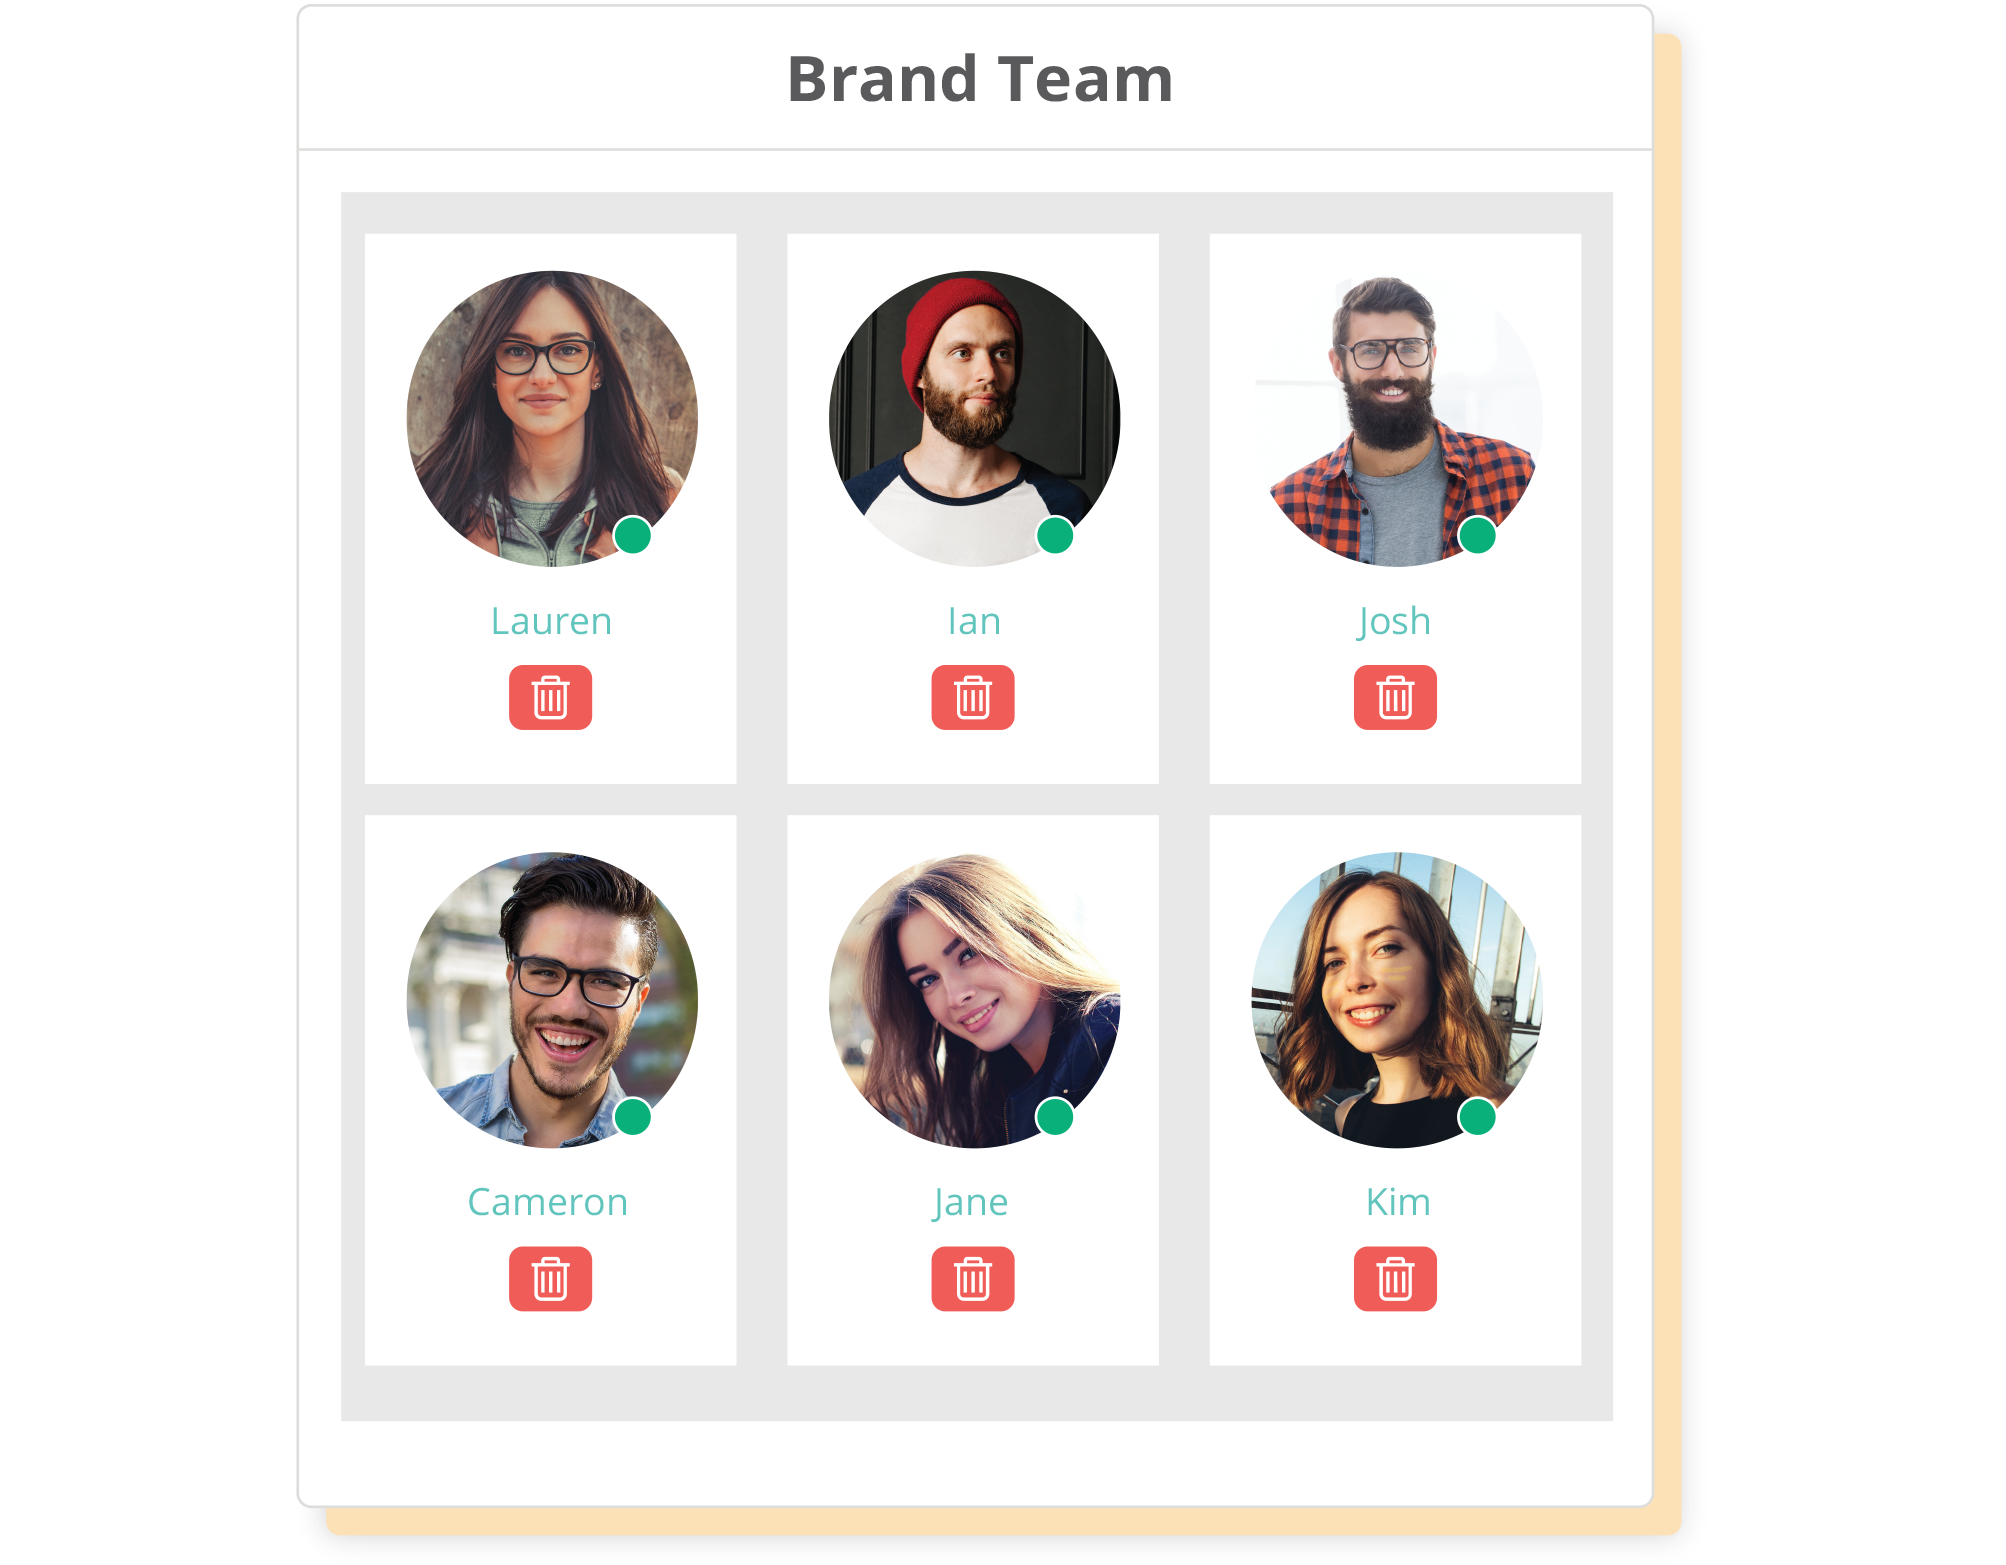 Easily manage all your teams and projects